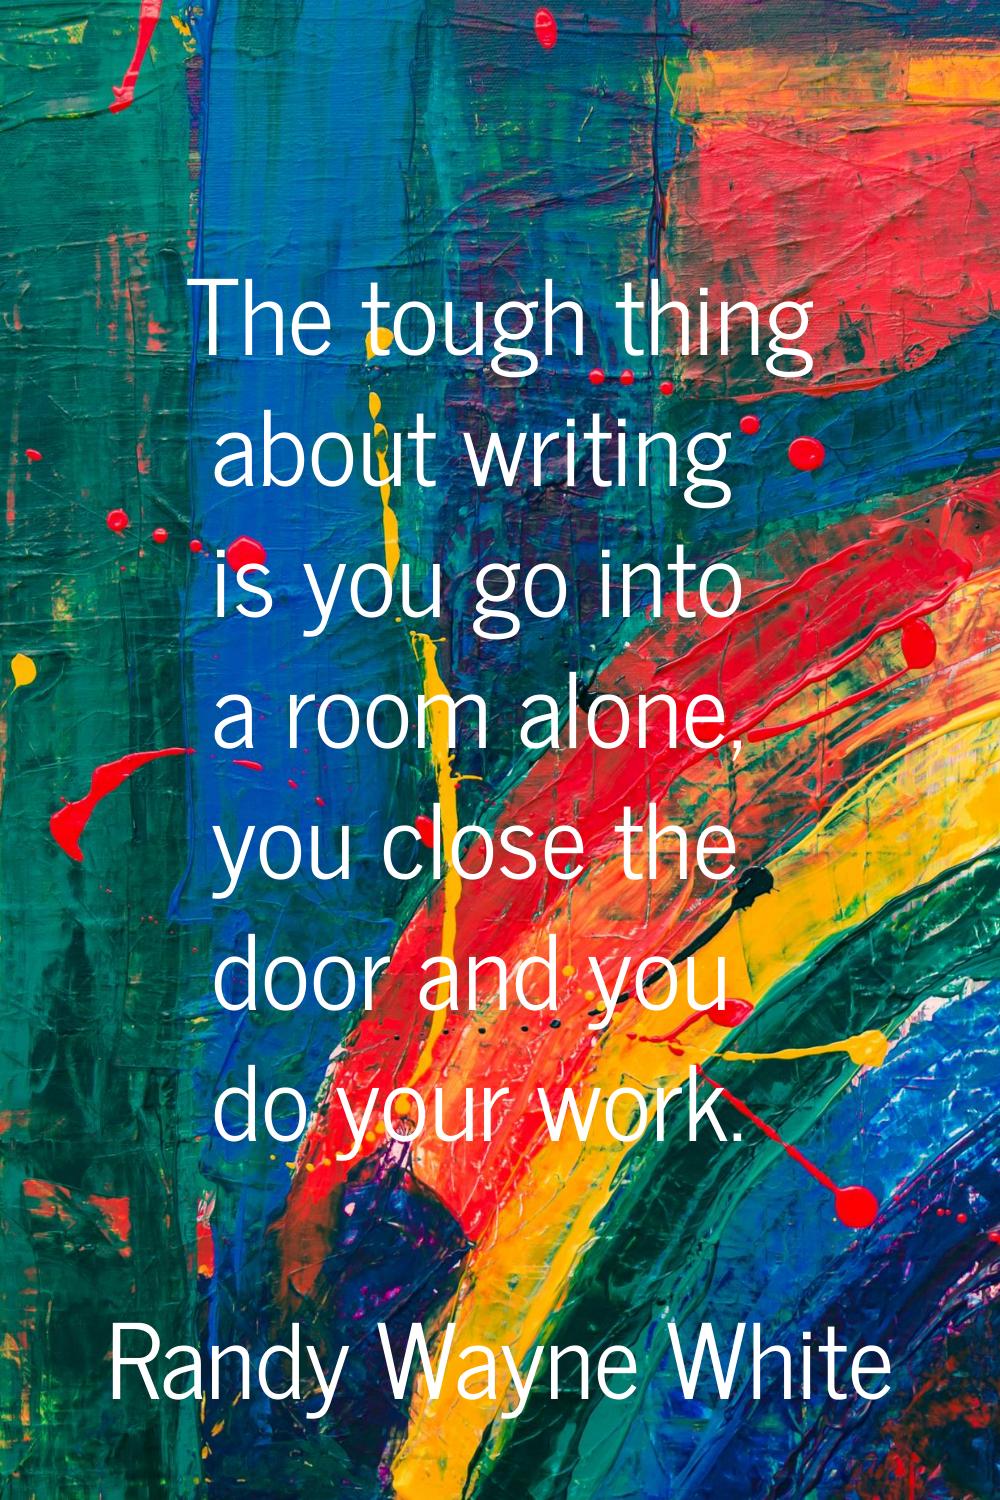 The tough thing about writing is you go into a room alone, you close the door and you do your work.